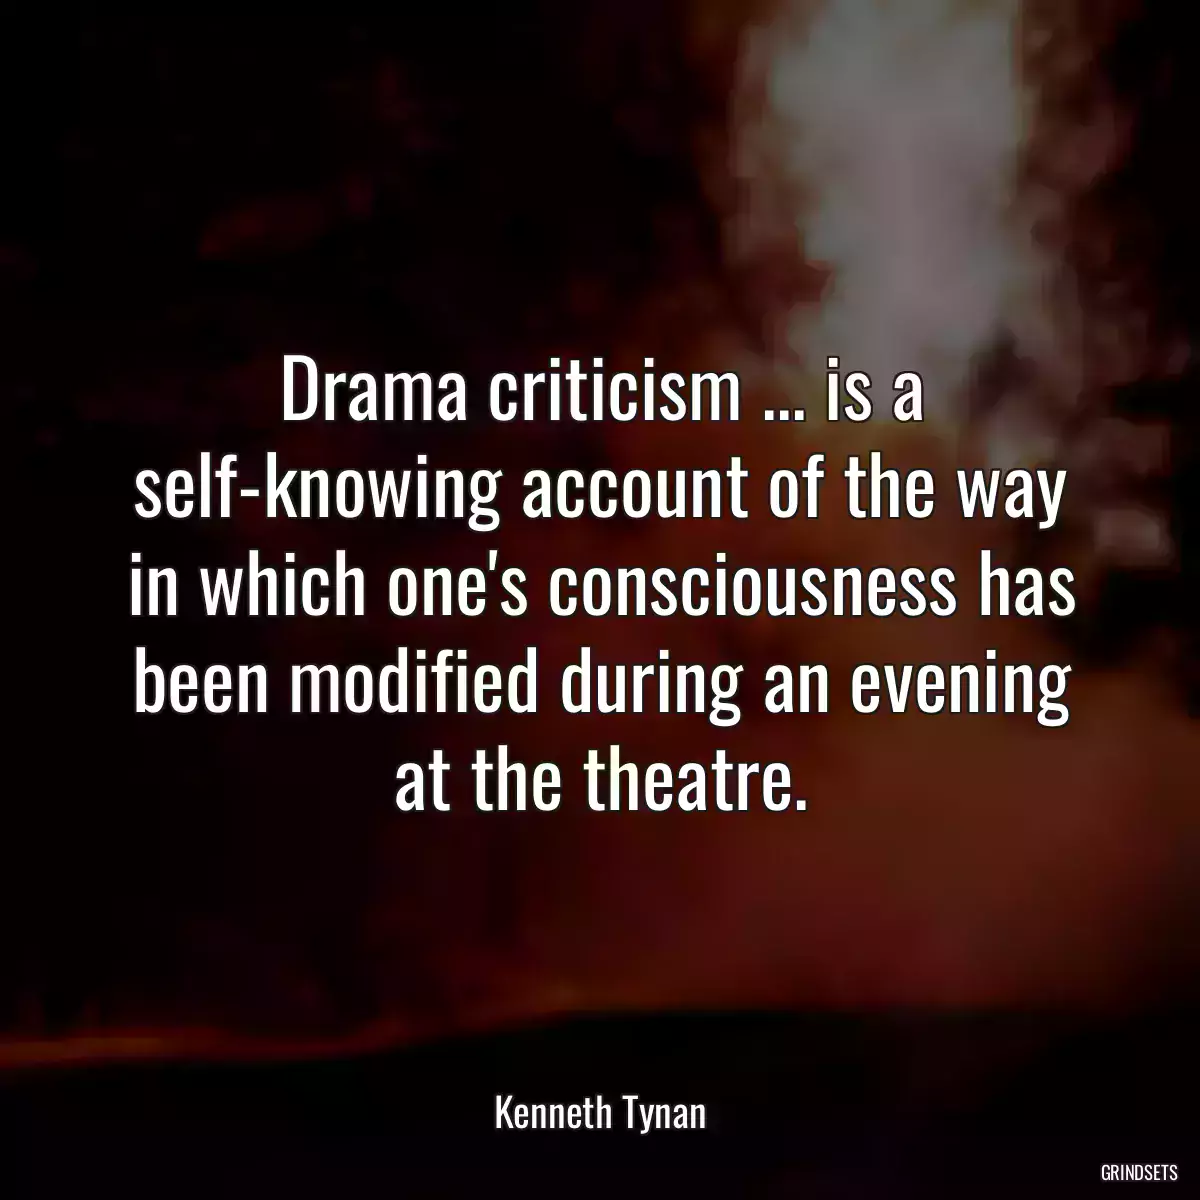 Drama criticism ... is a self-knowing account of the way in which one\'s consciousness has been modified during an evening at the theatre.